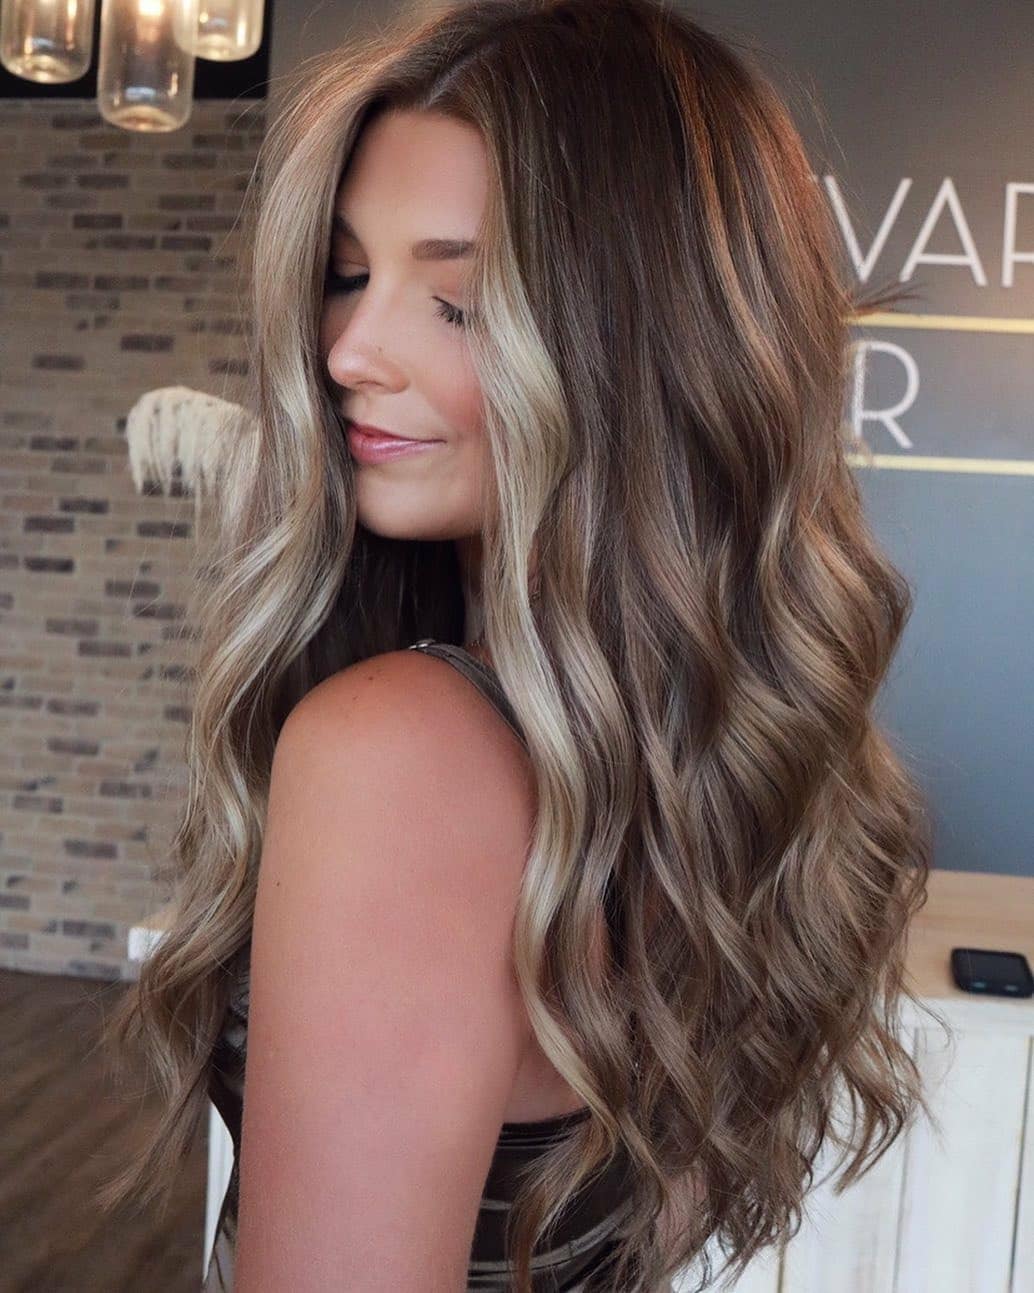 Female Long Hairstyles with Color Trends - Women Long Hair Styles and Haircuts in 2021